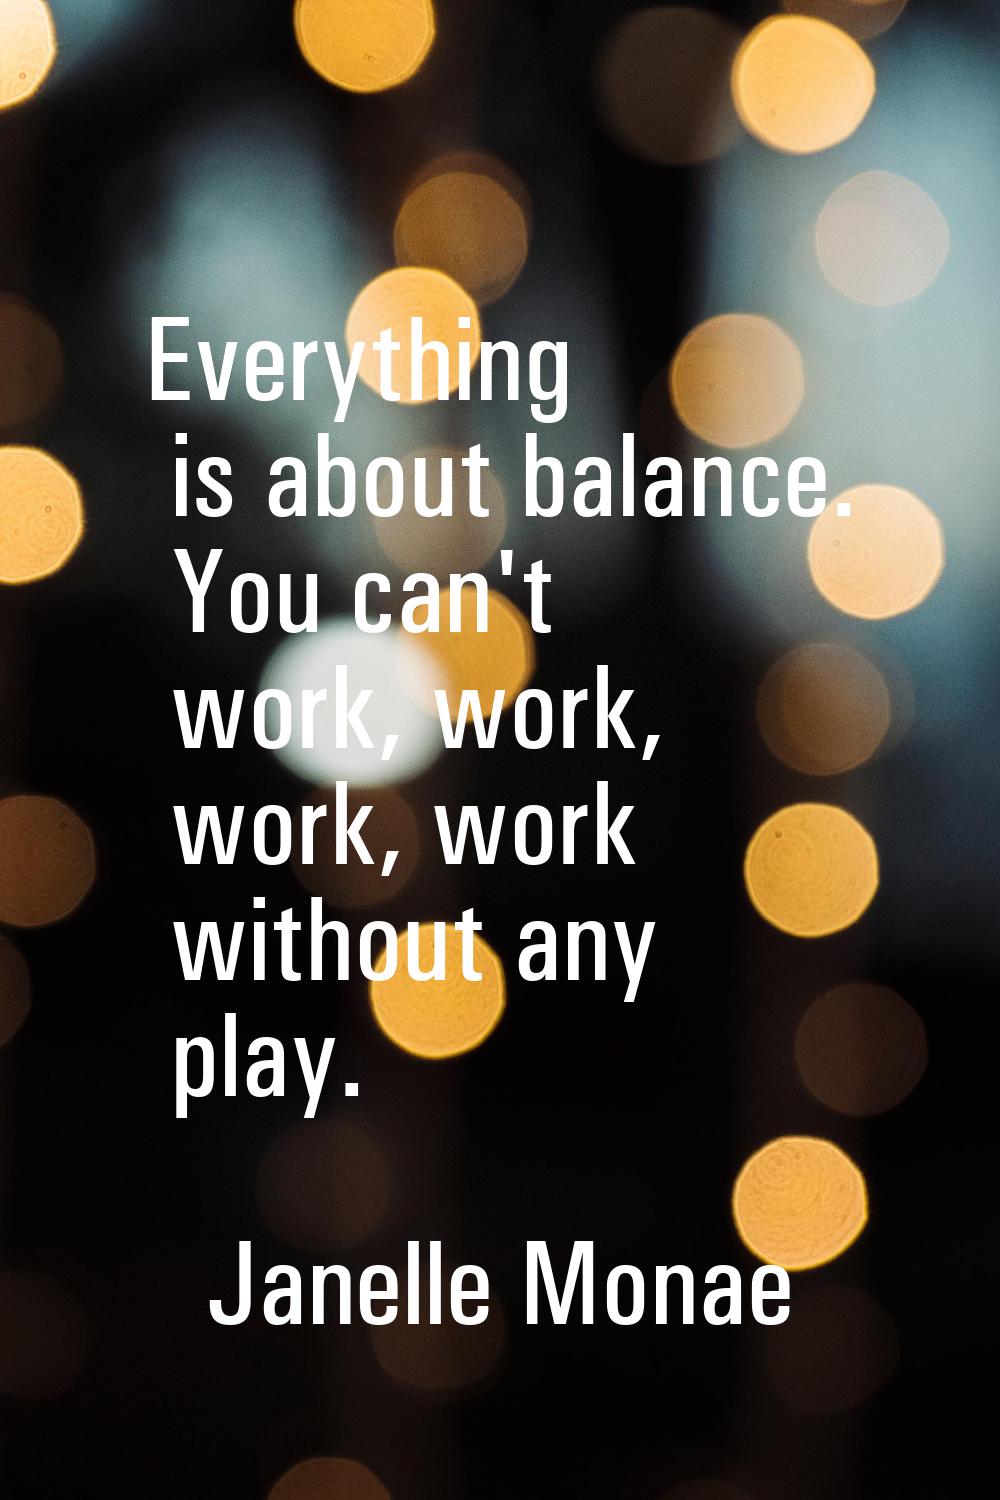 Everything is about balance. You can't work, work, work, work without any play.